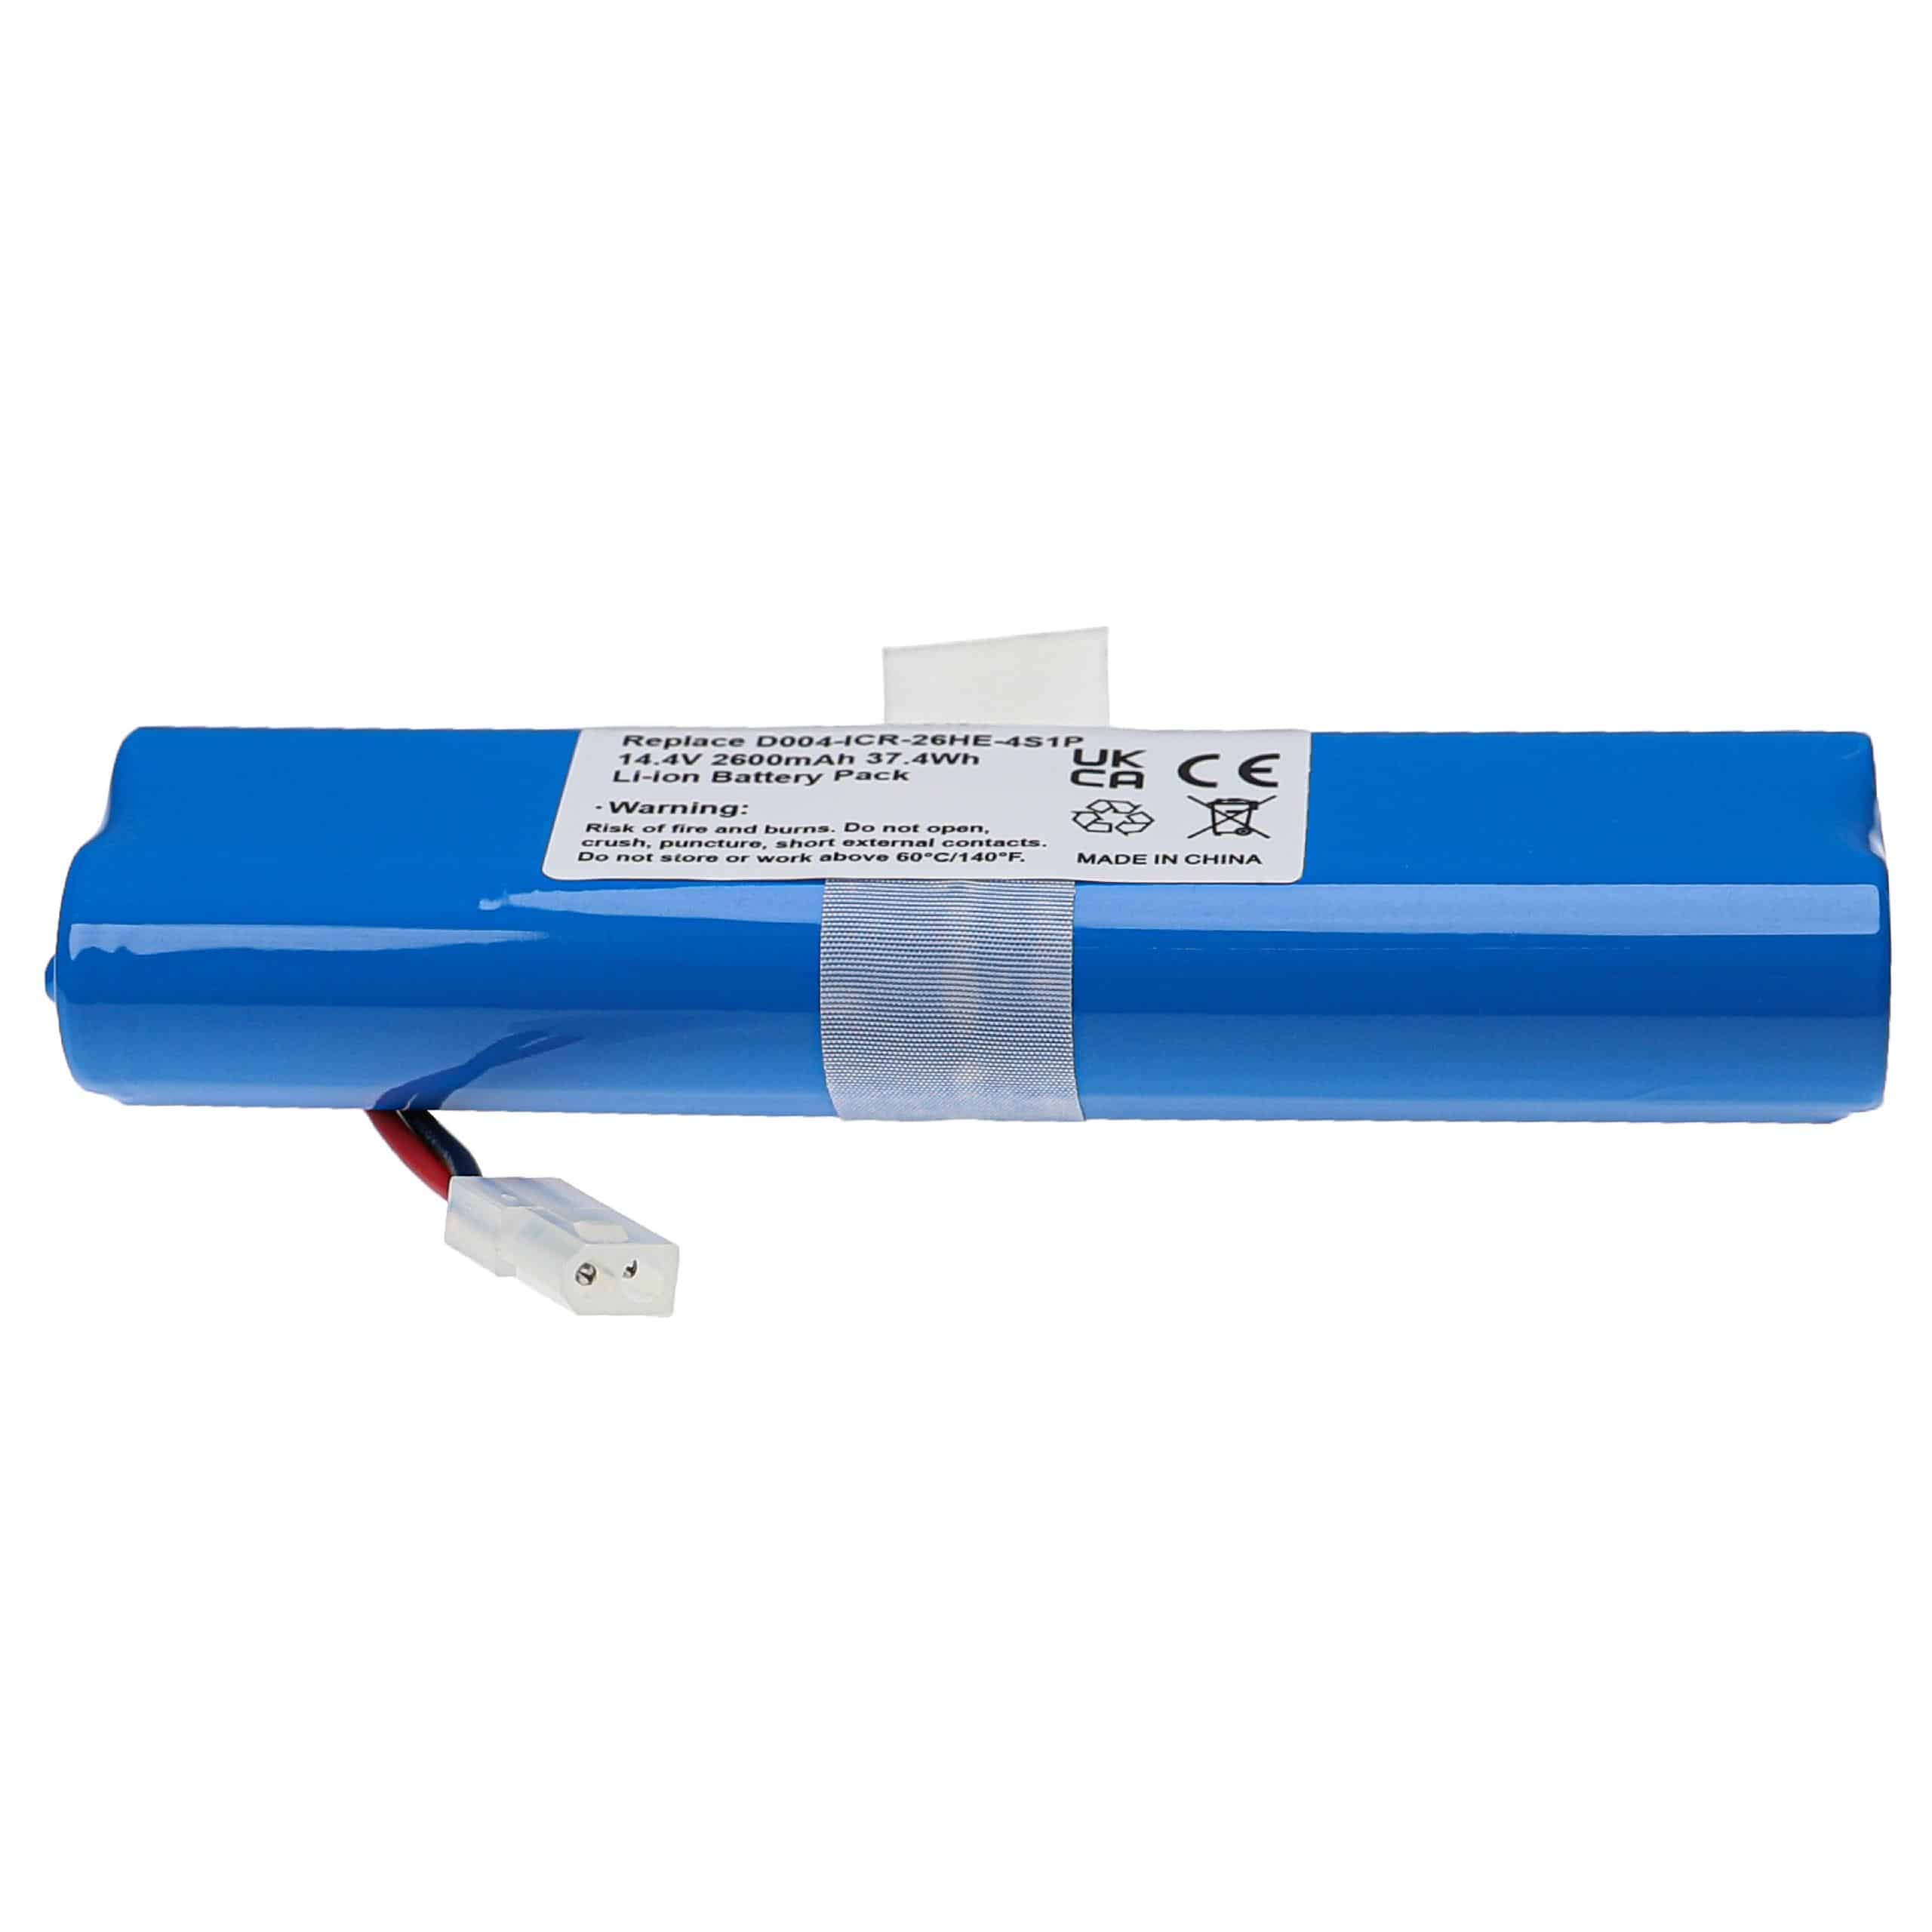 Battery Replacement for 360 D004-ICR-26HE-4S1P for - 2600mAh, 14.4V, Li-Ion